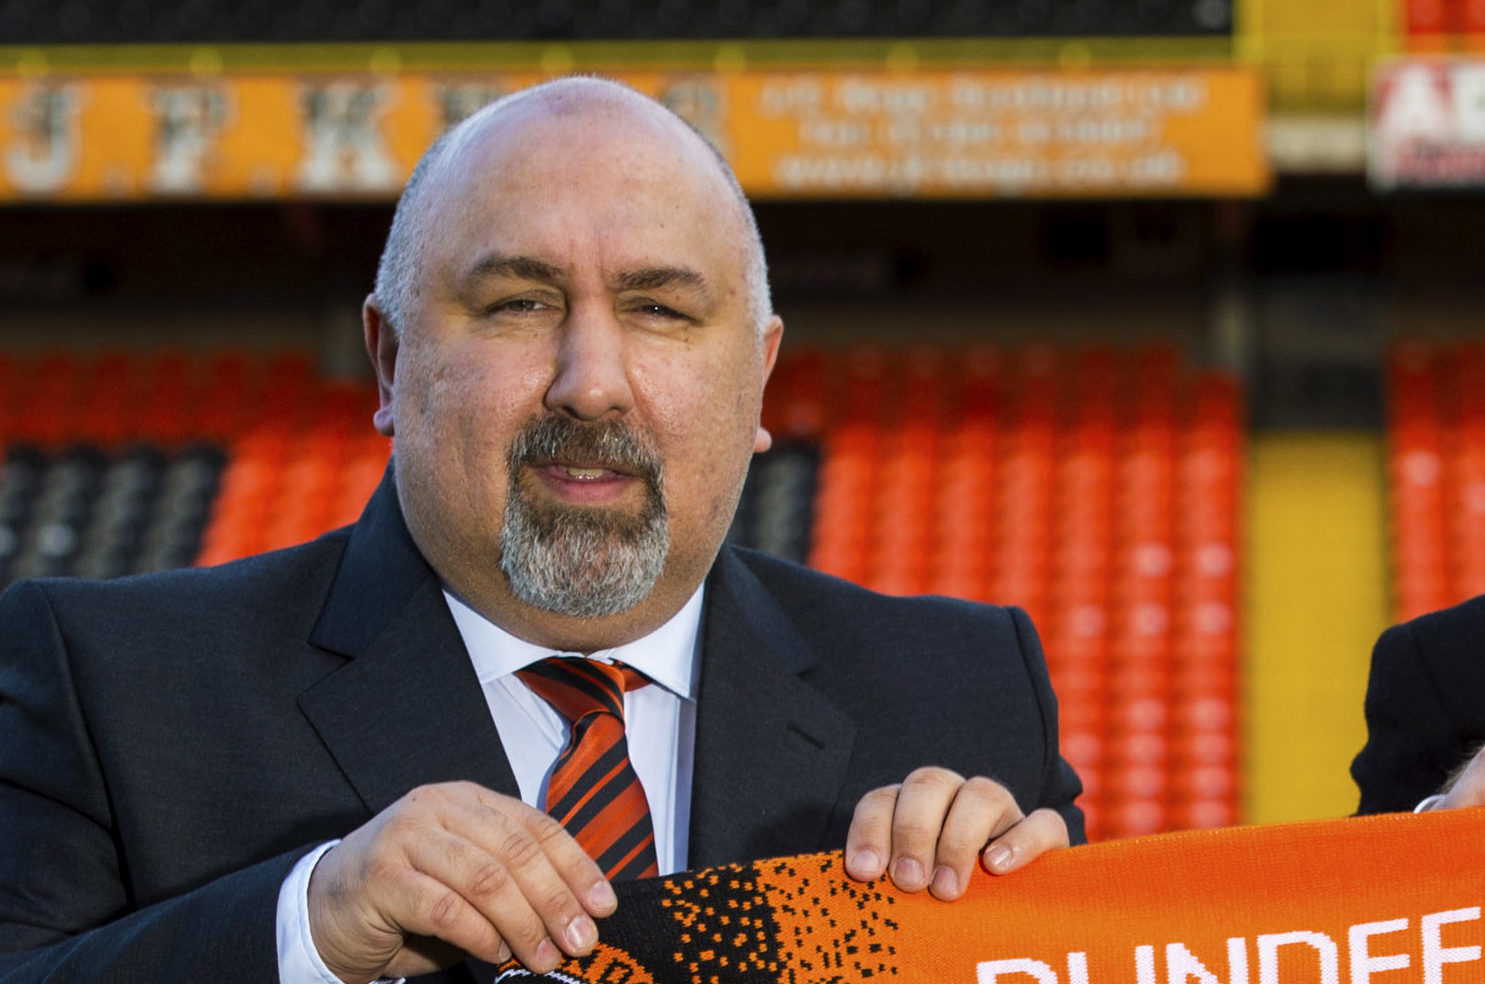 Dundee United sporting director Tony Asghar and owner Mark Ogren have sanctioned a very active transfer window for Dundee United.